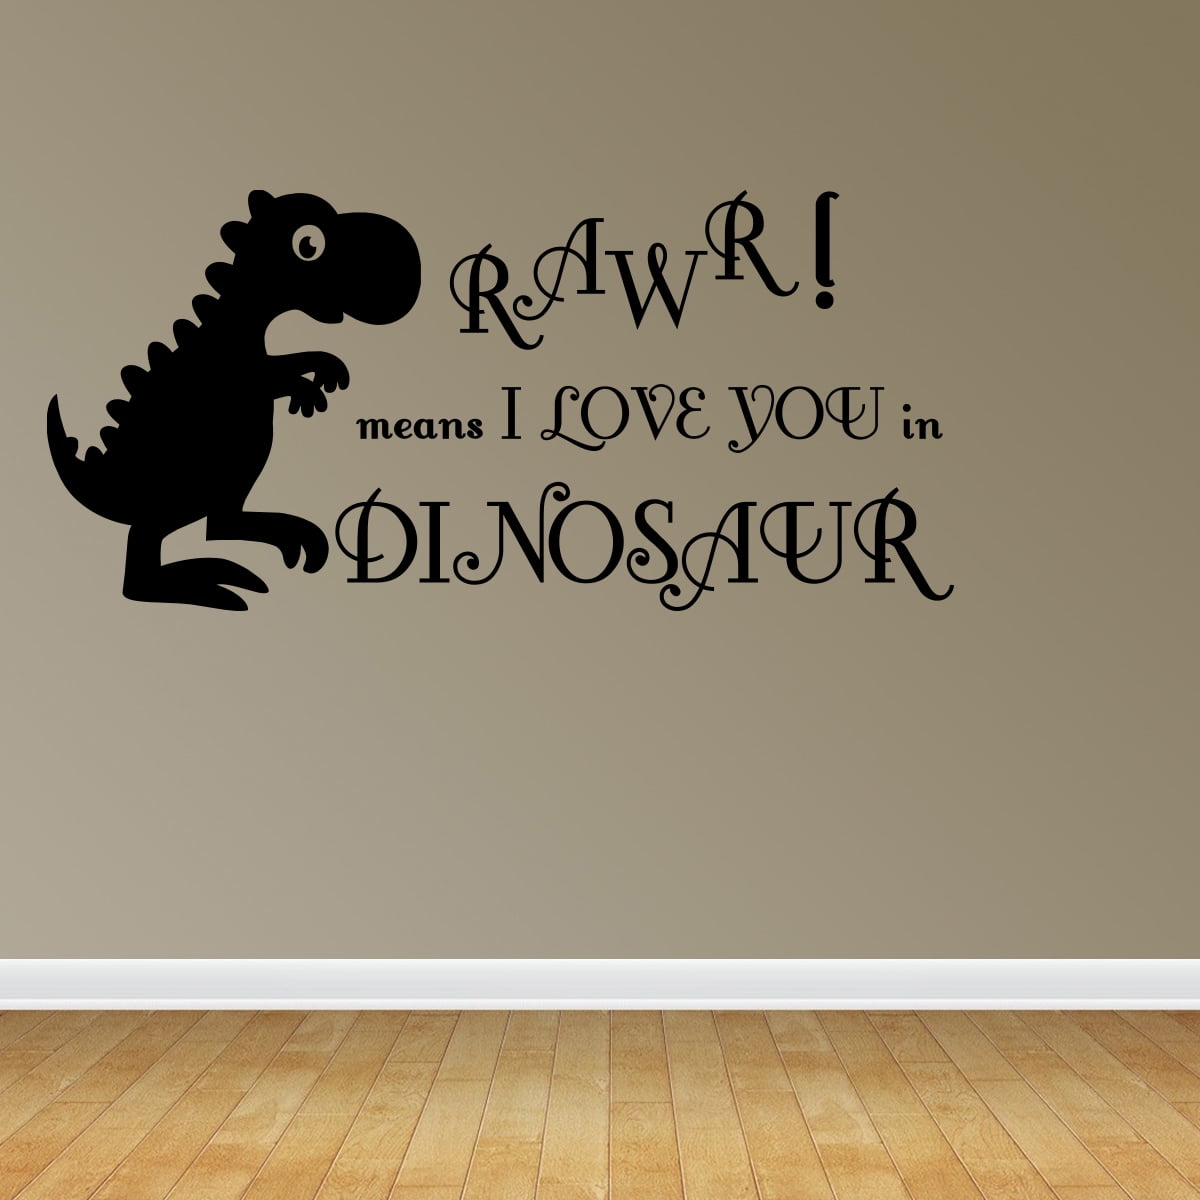 Details about   Dinosaur Wall Sticker Inspired Roar Means I Love You Animal Quote Kid Room Decor